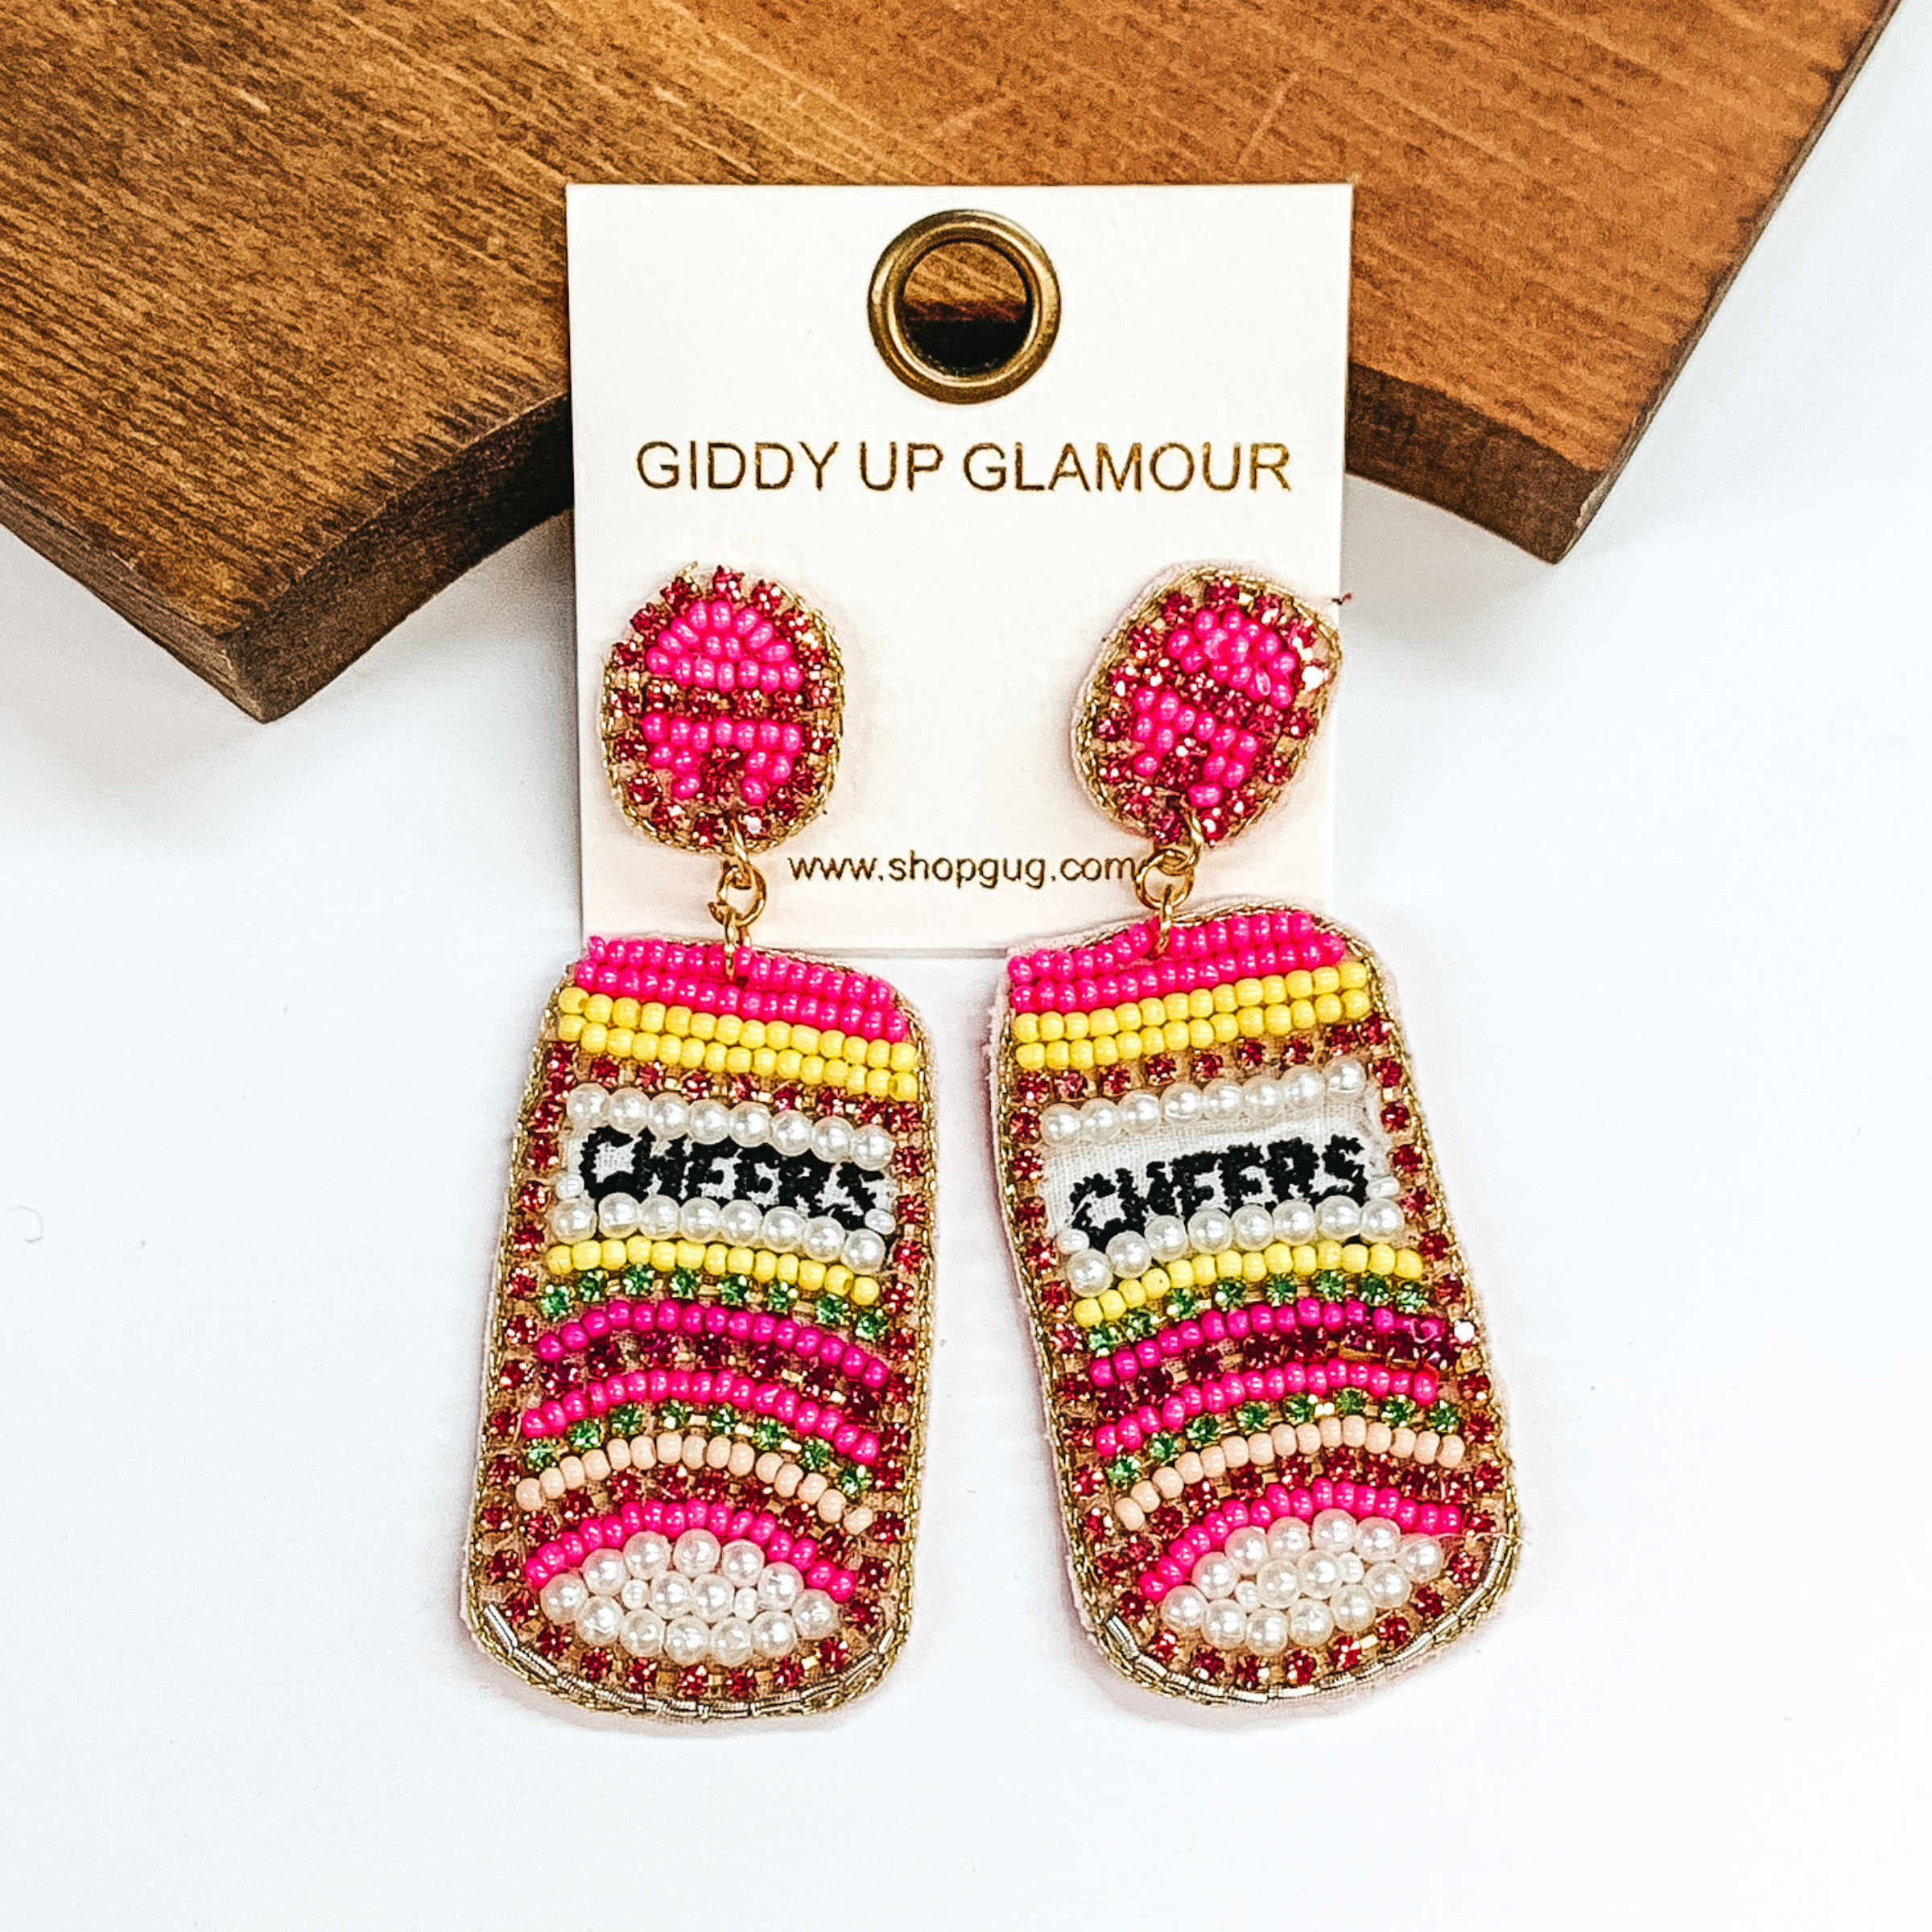 Drinking can beaded earrings in different shades of  pink beads and yellow. With green,light pink, and hot pink crystals, and pearls. With "CHEERS" in the  center. Outlined with gold thread. Taken in a white  background with a brown block.